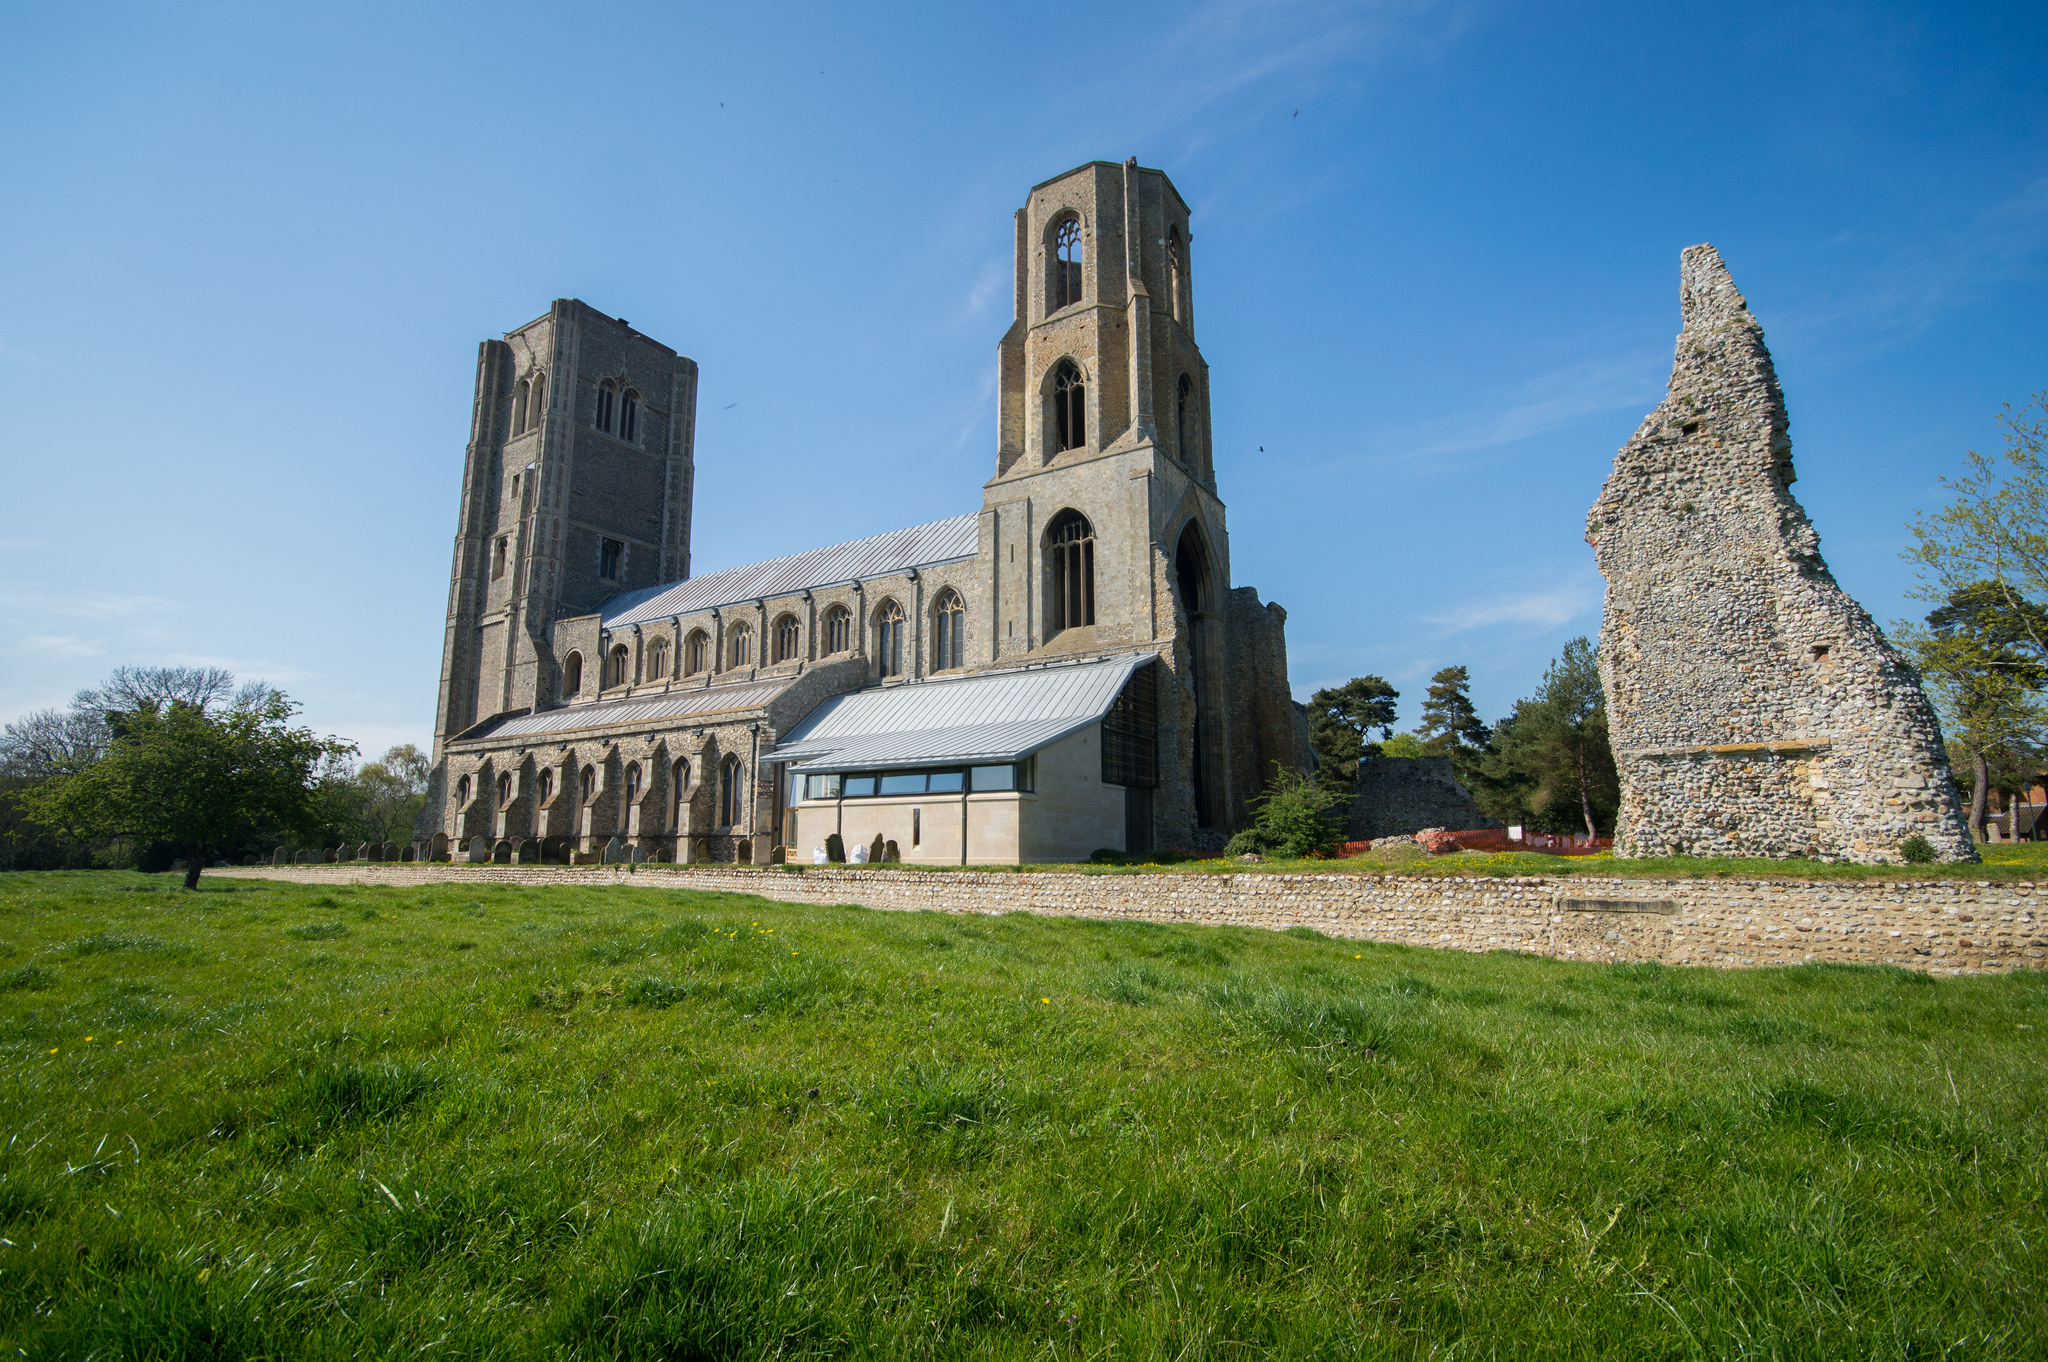 Talk: What’s up in the Tower? – Wymondham Abbey, 28th April